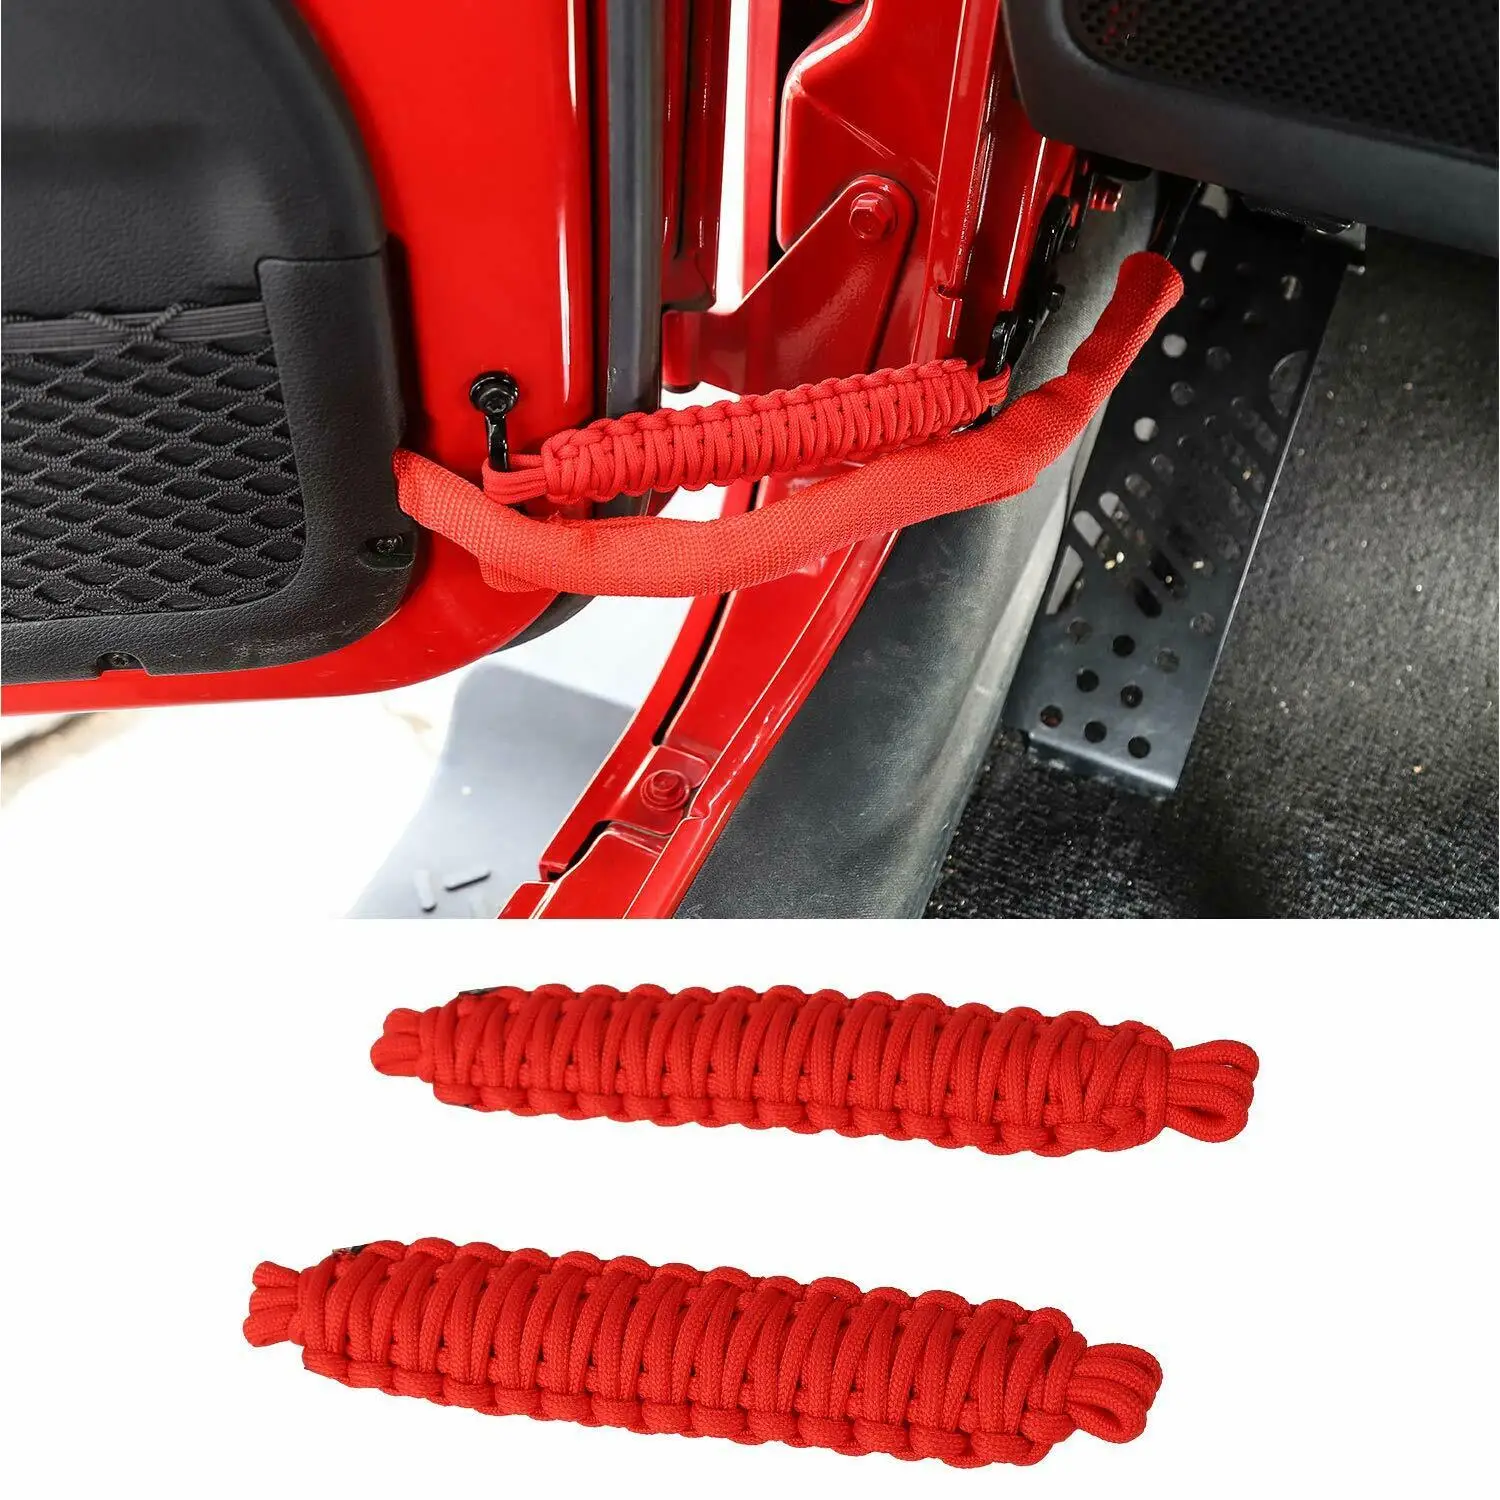 

Hot Sale BRAND NEW HIGH QUALITY Tie Rope 0.07 KG 2pcs Bandage Car For Jeep Wrangler YJ CJ TJ JK Limiting PVC Red Rope